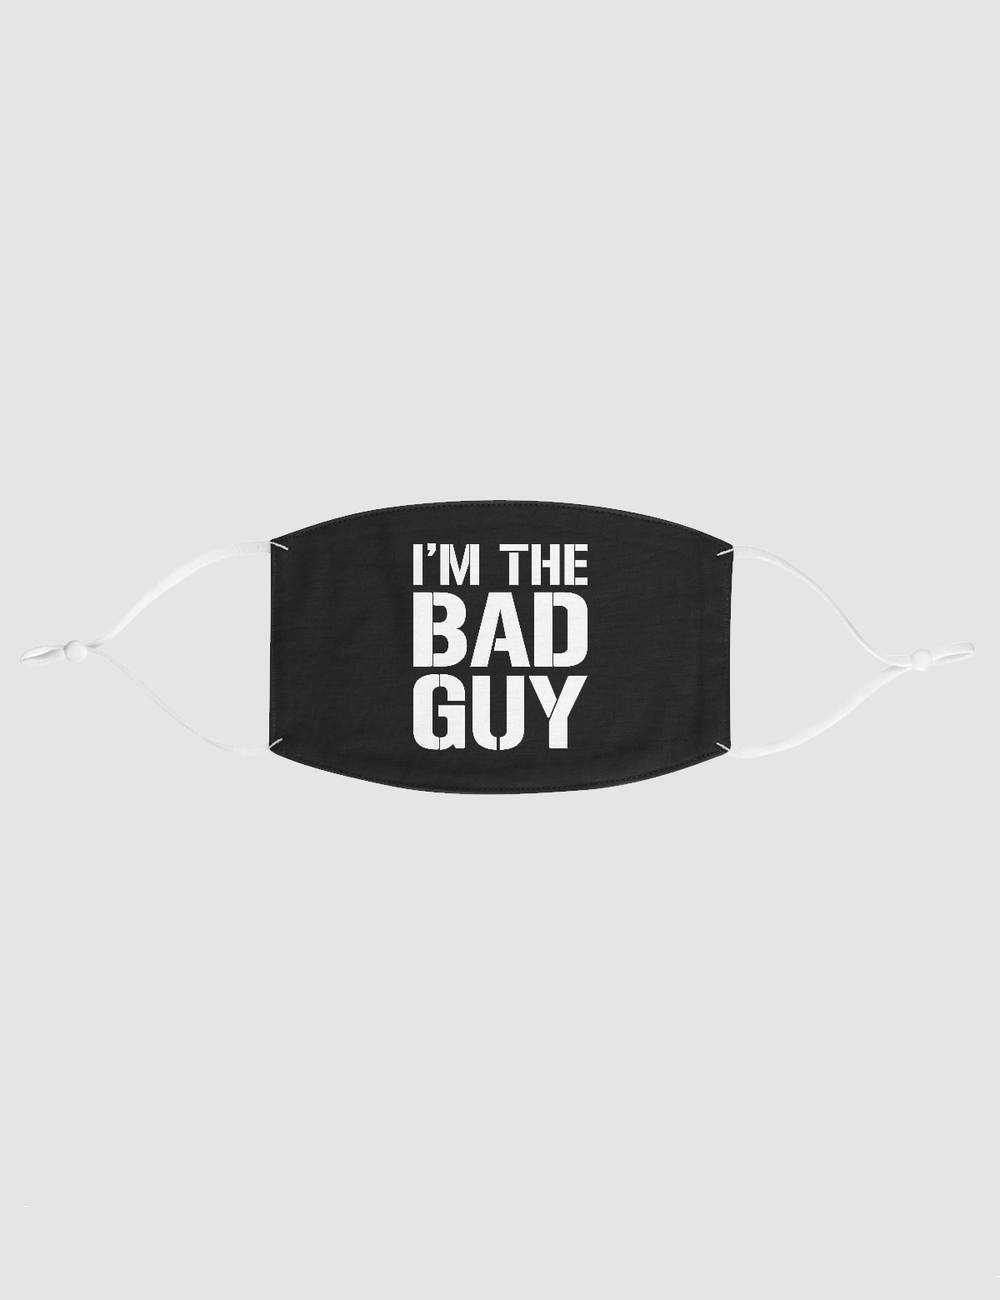 I'm The Bad Guy | Two-Layer Polyester Fabric Face Mask OniTakai